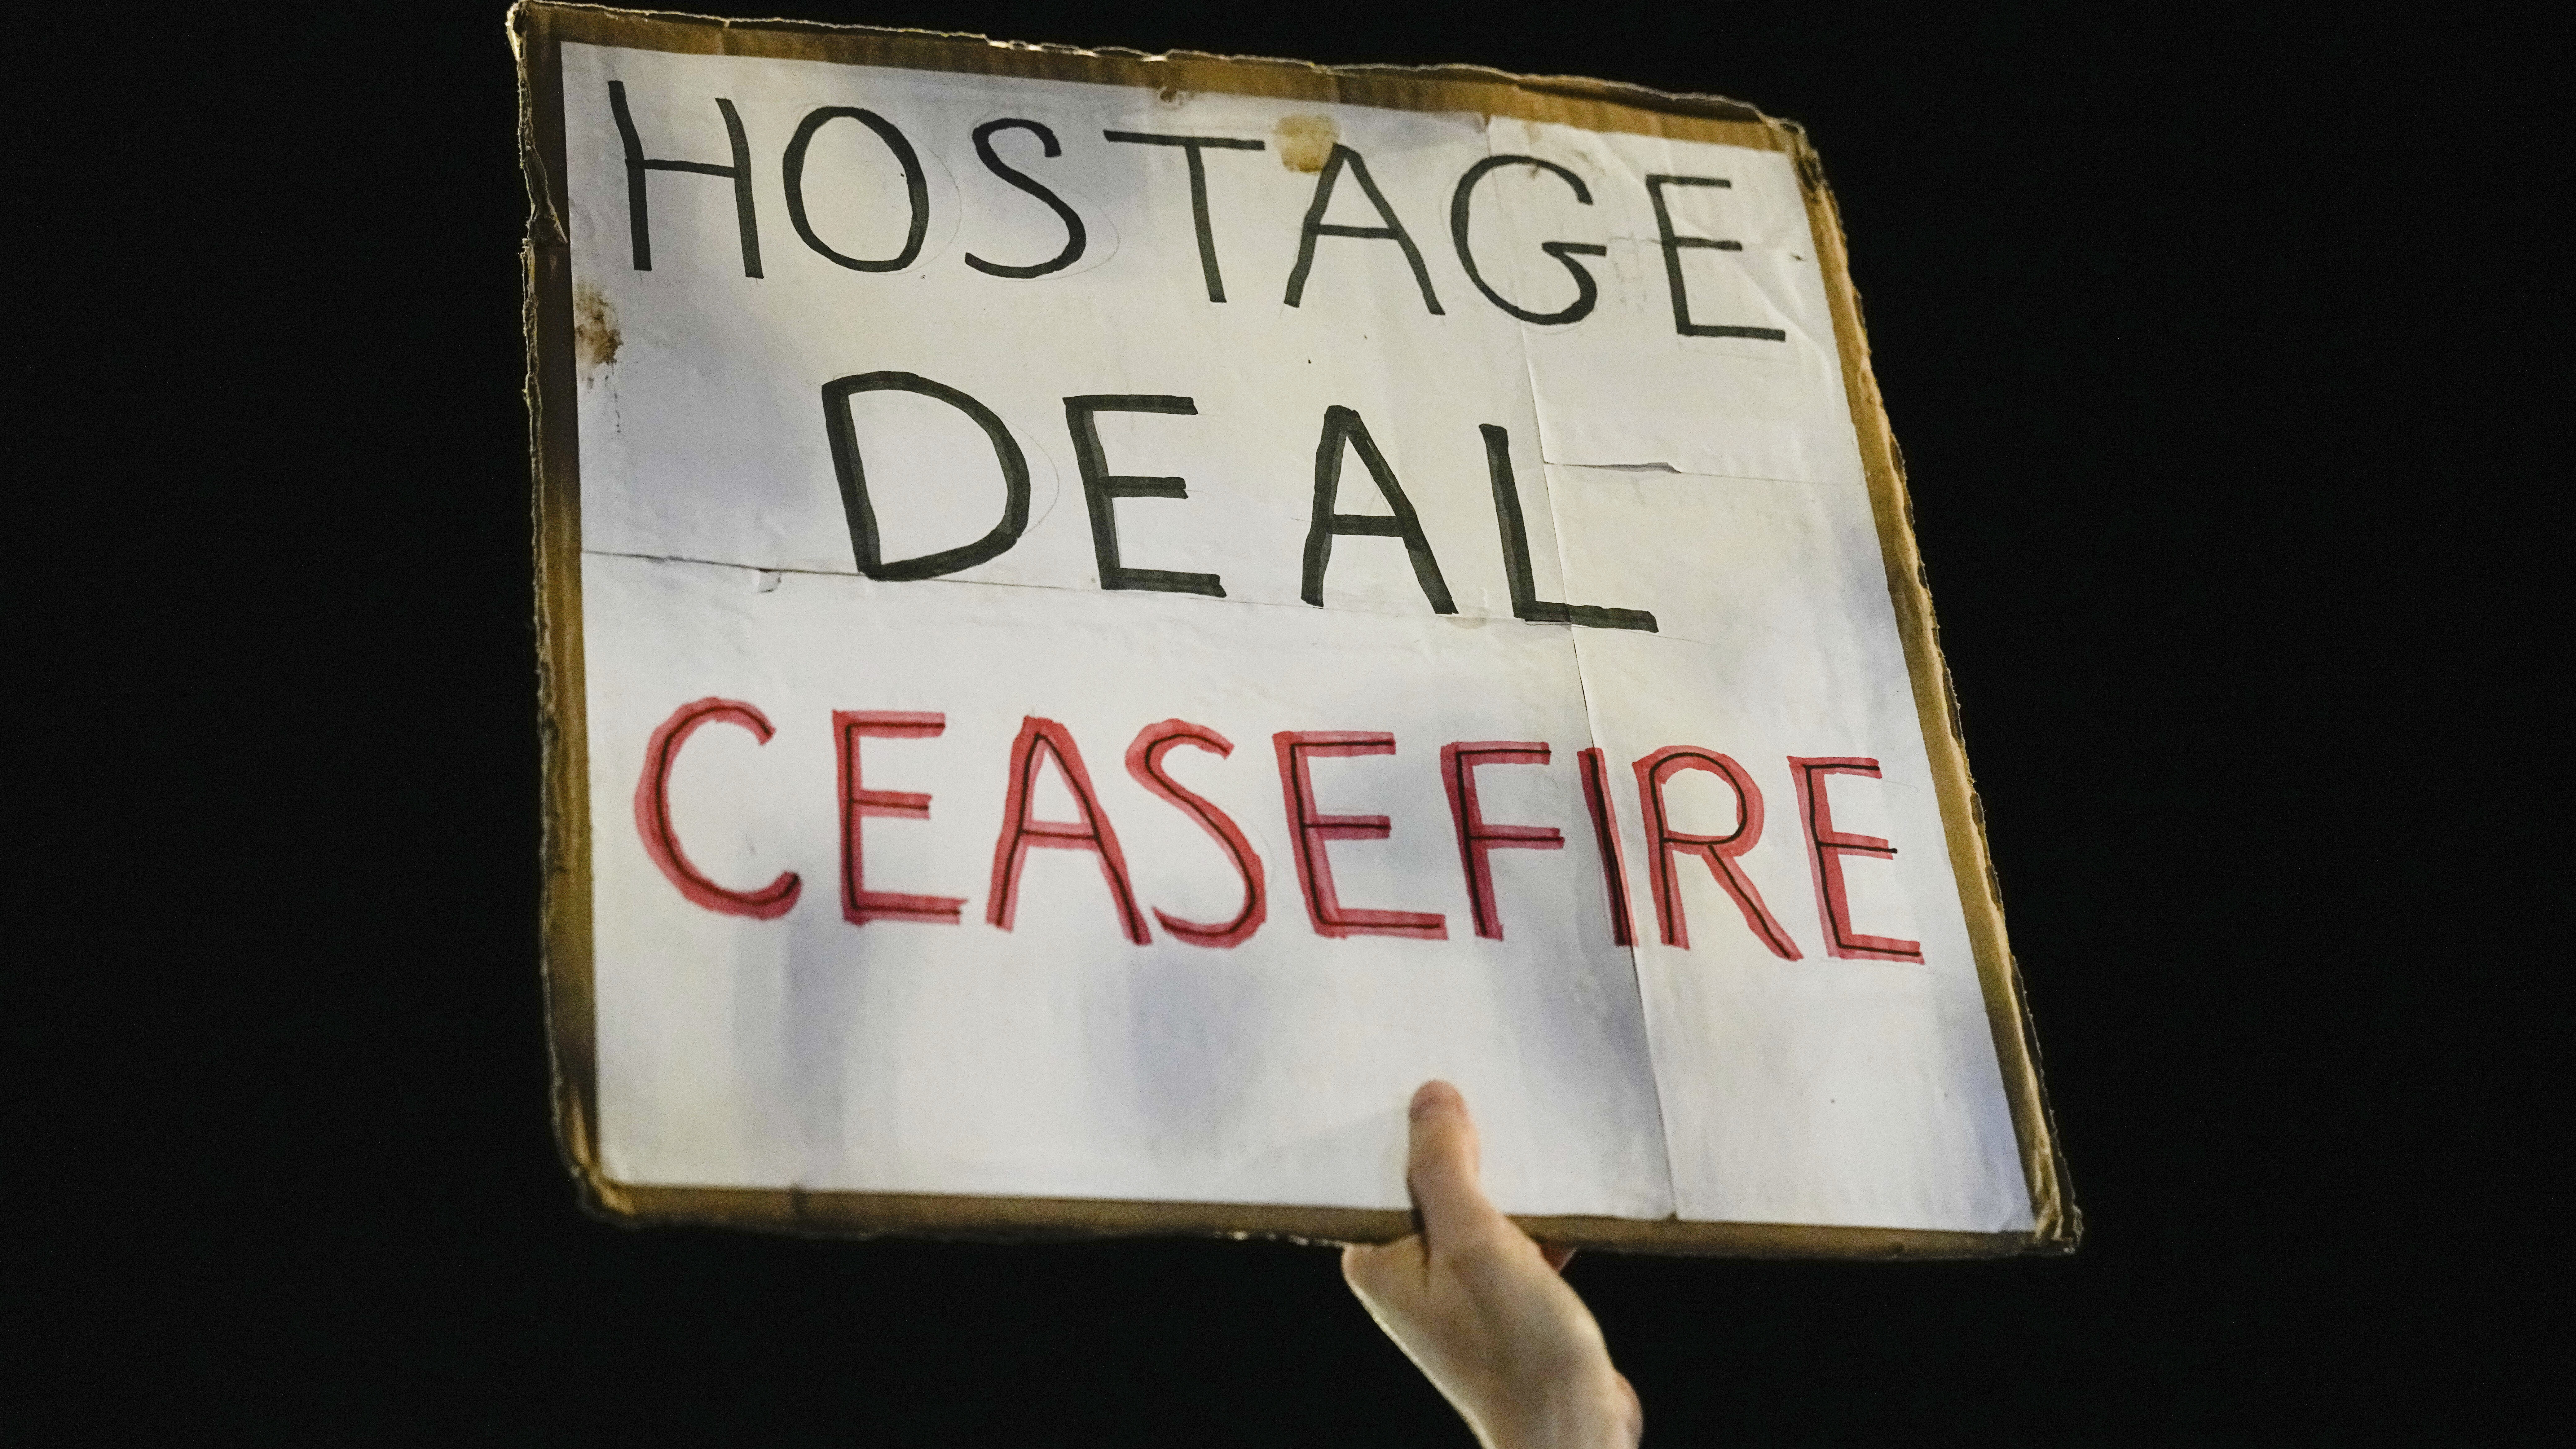 a sign says "hostage deal ceasefire"...